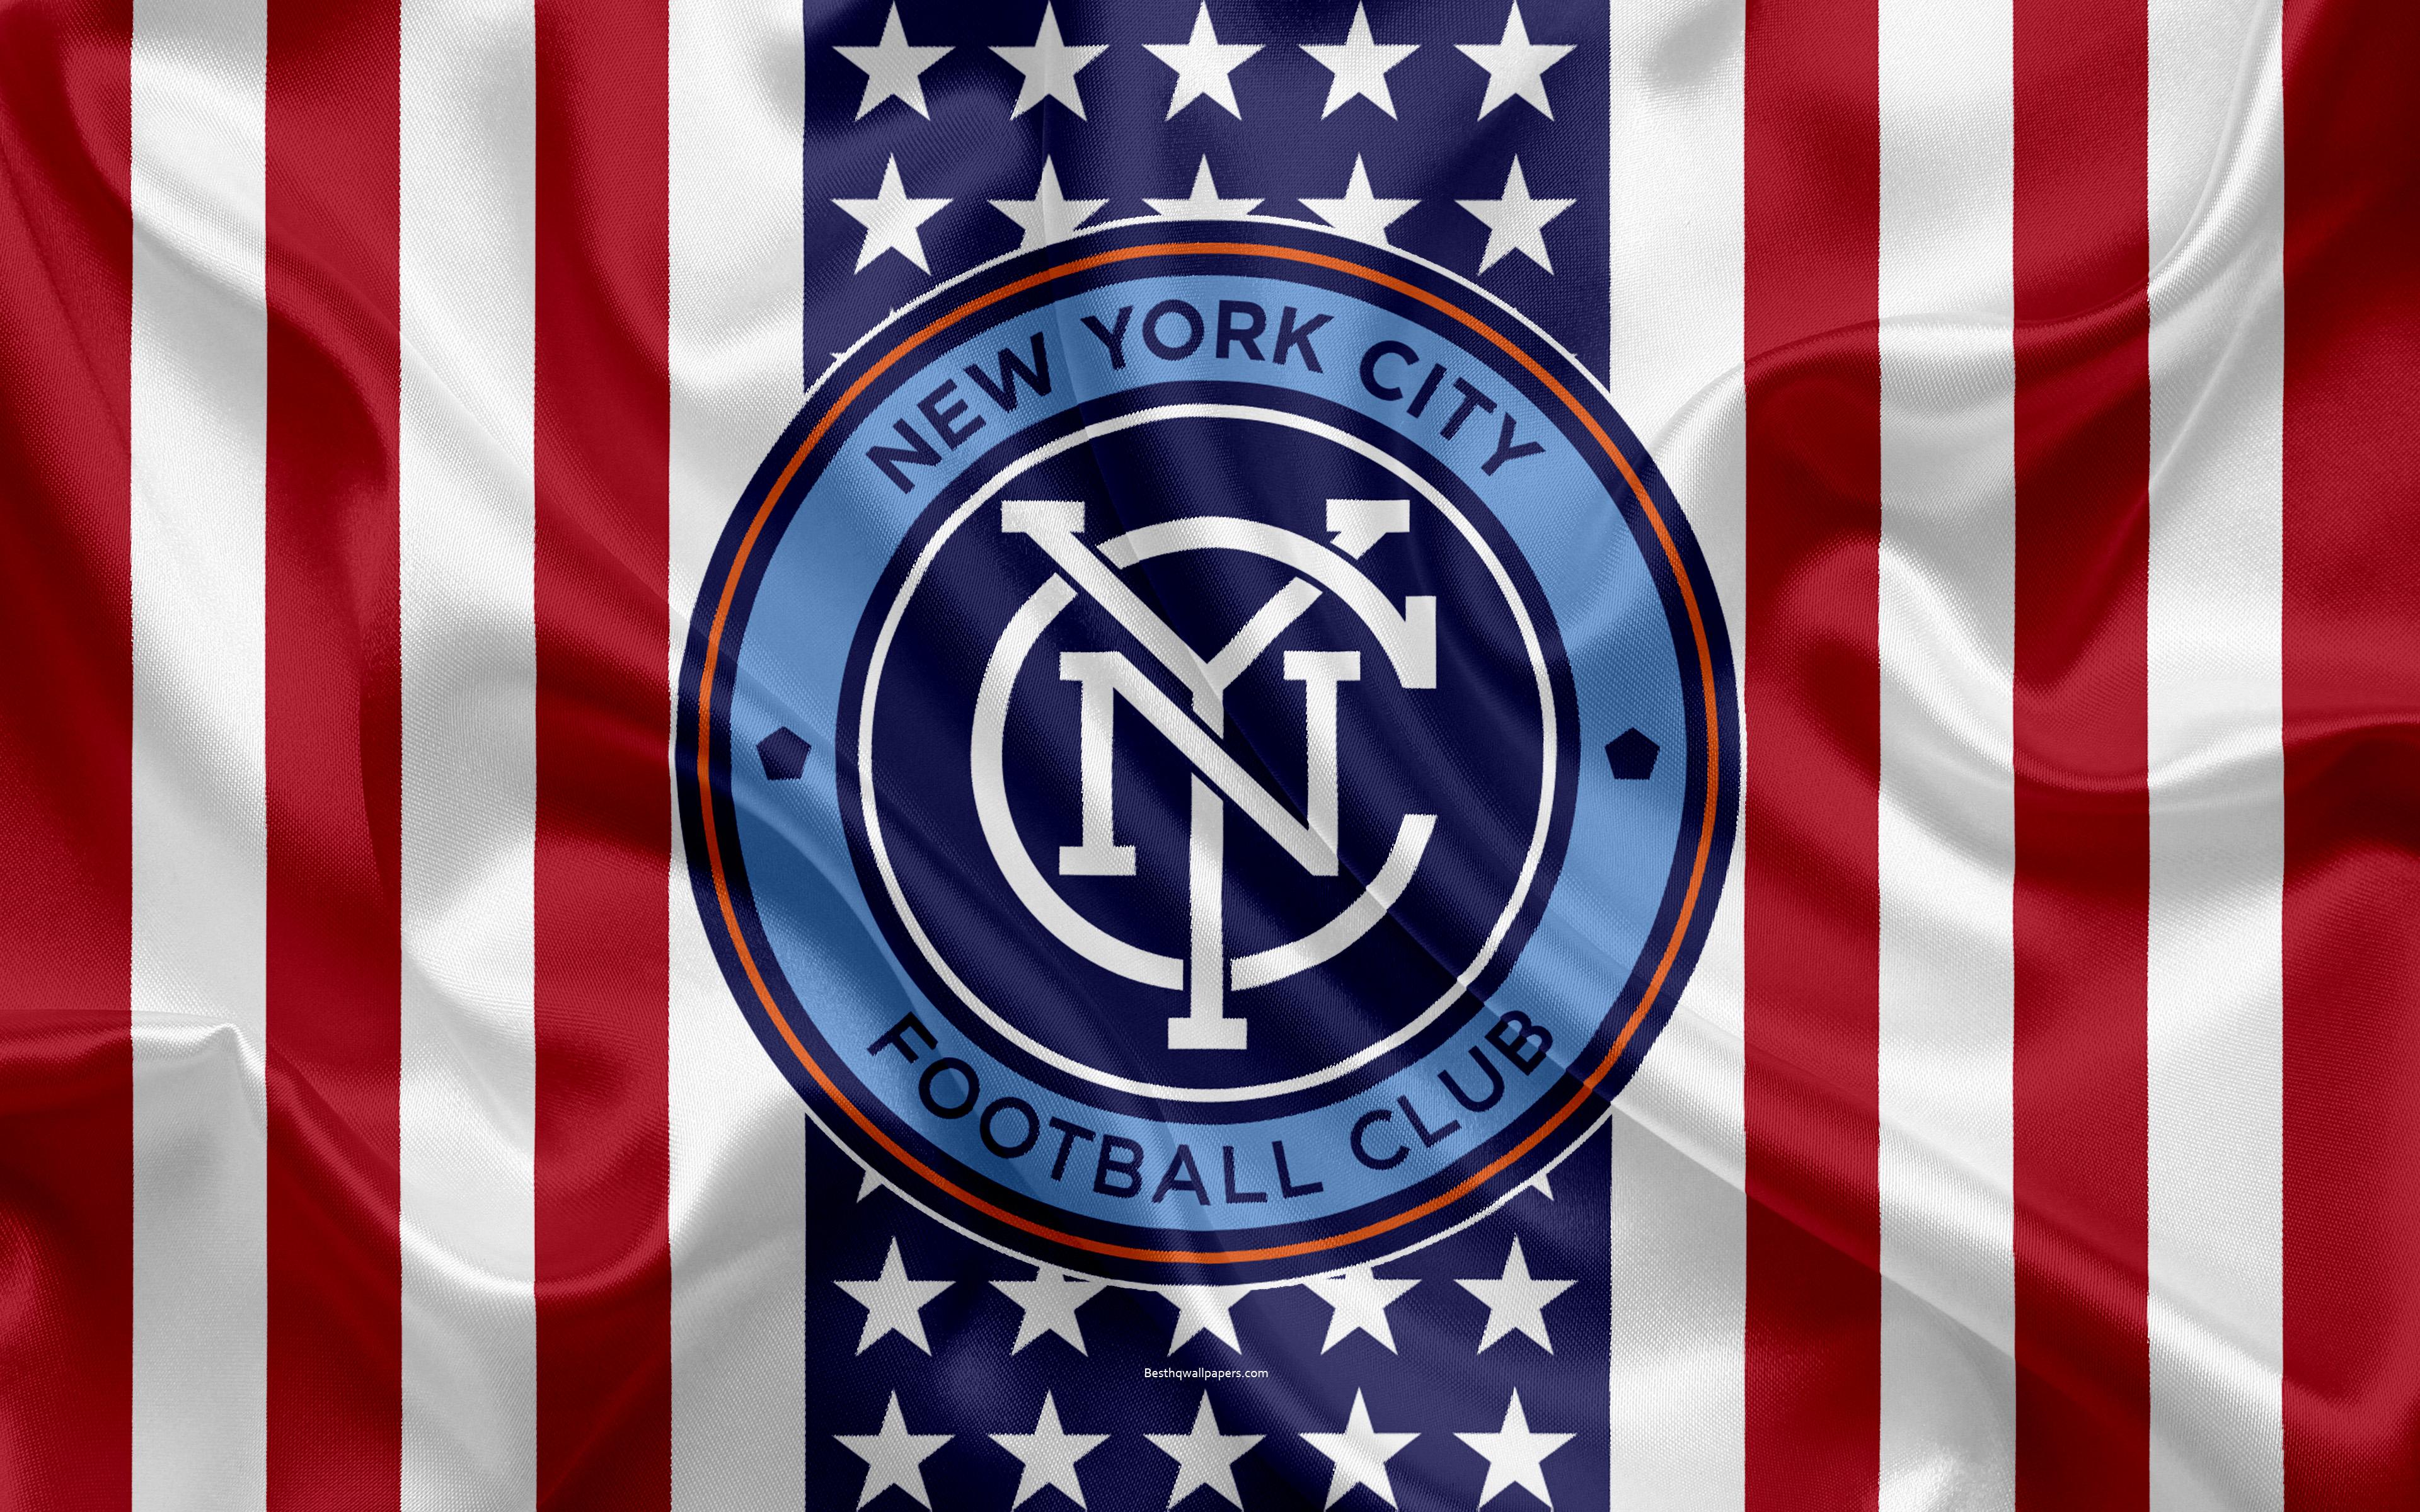 Download wallpaper New York City FC, 4k, logo, silk texture, American flag, emblem, football club, MLS, New York, USA, Major League Soccer, Eastern conference for desktop with resolution 3840x2400. High Quality HD